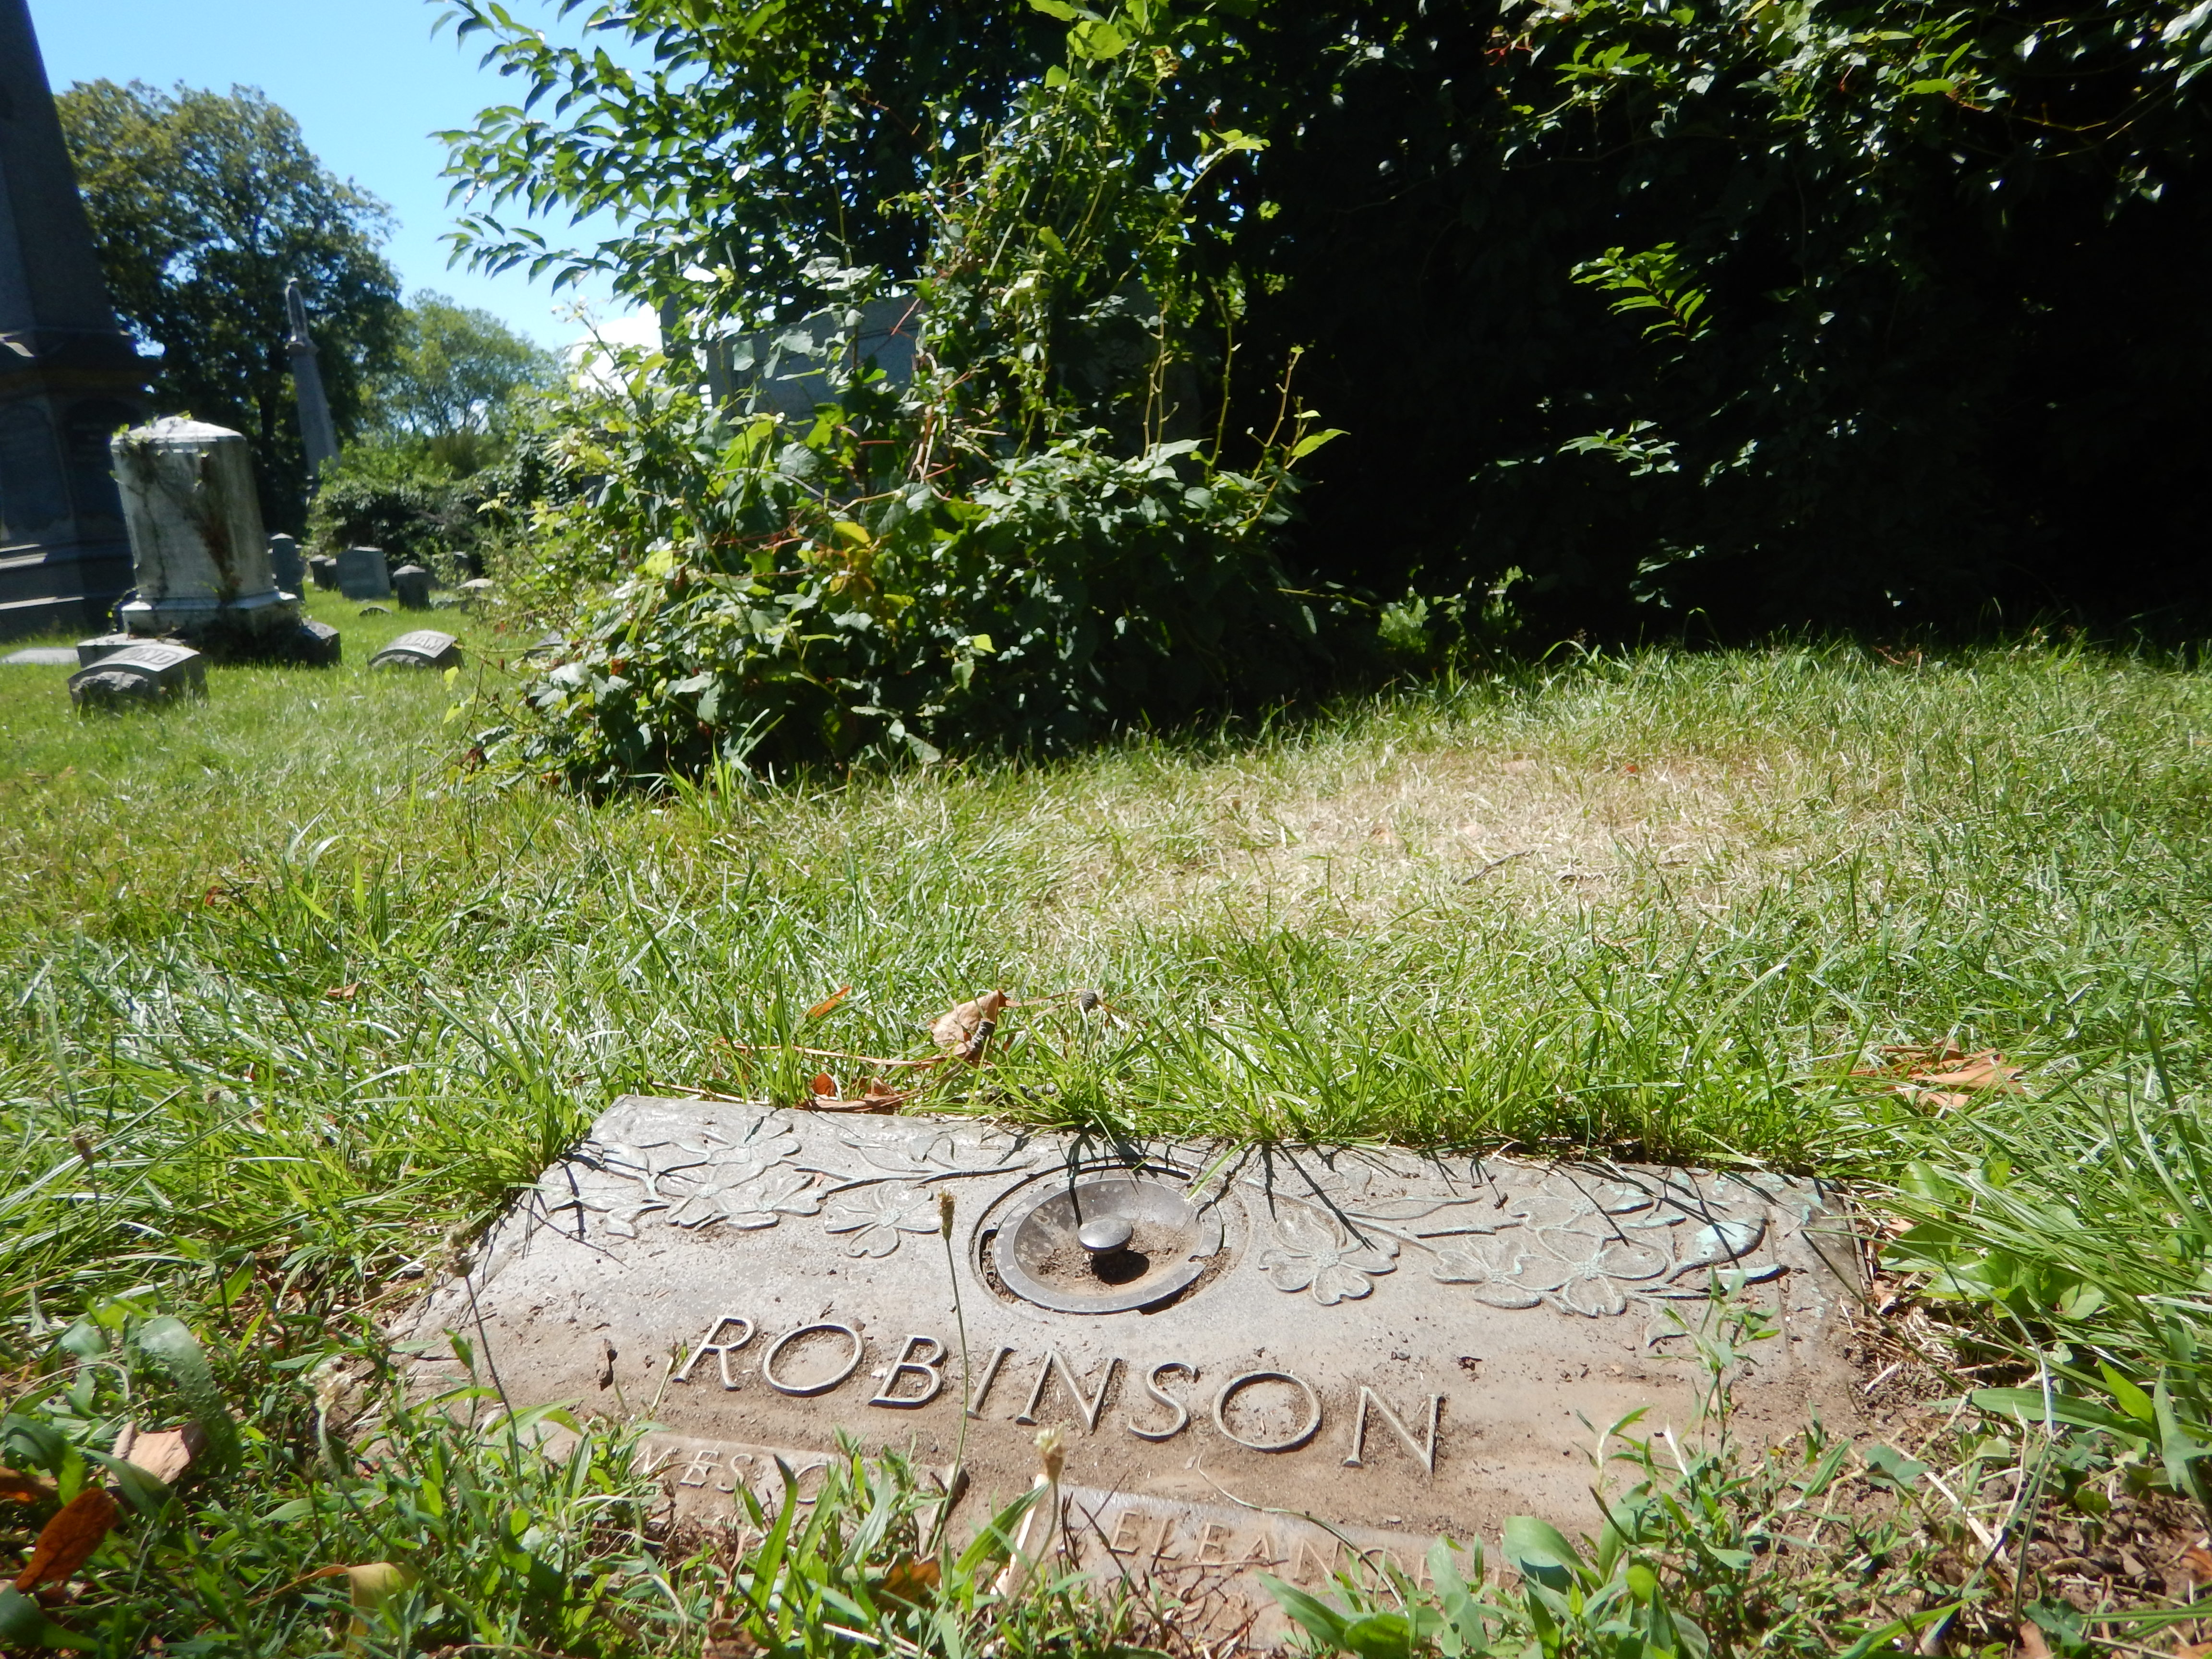 Robinson grave site in Moravian Cemetery, Staten Island, N.Y.d